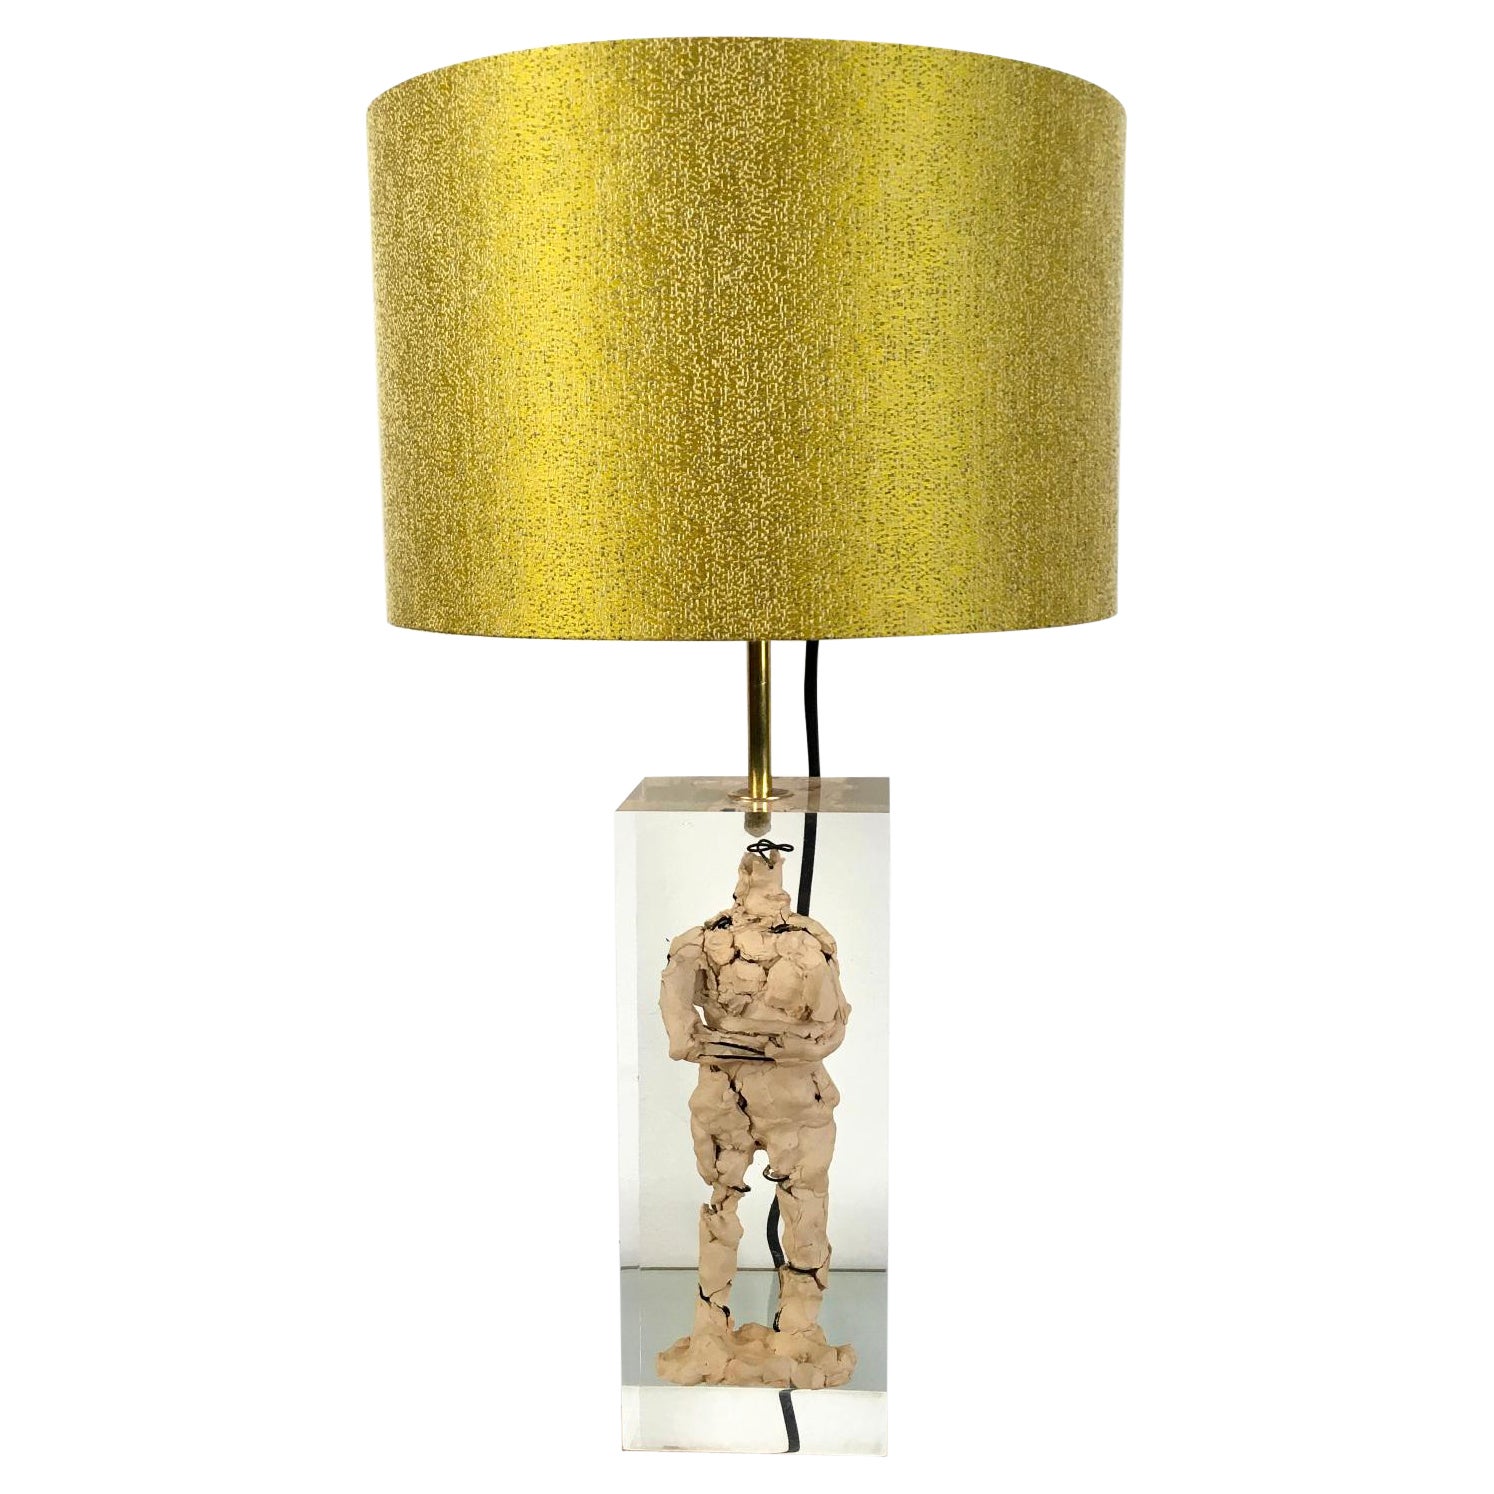  Lucite Table Lamp in a Manner of Maison Romeo Paris 1980s For Sale